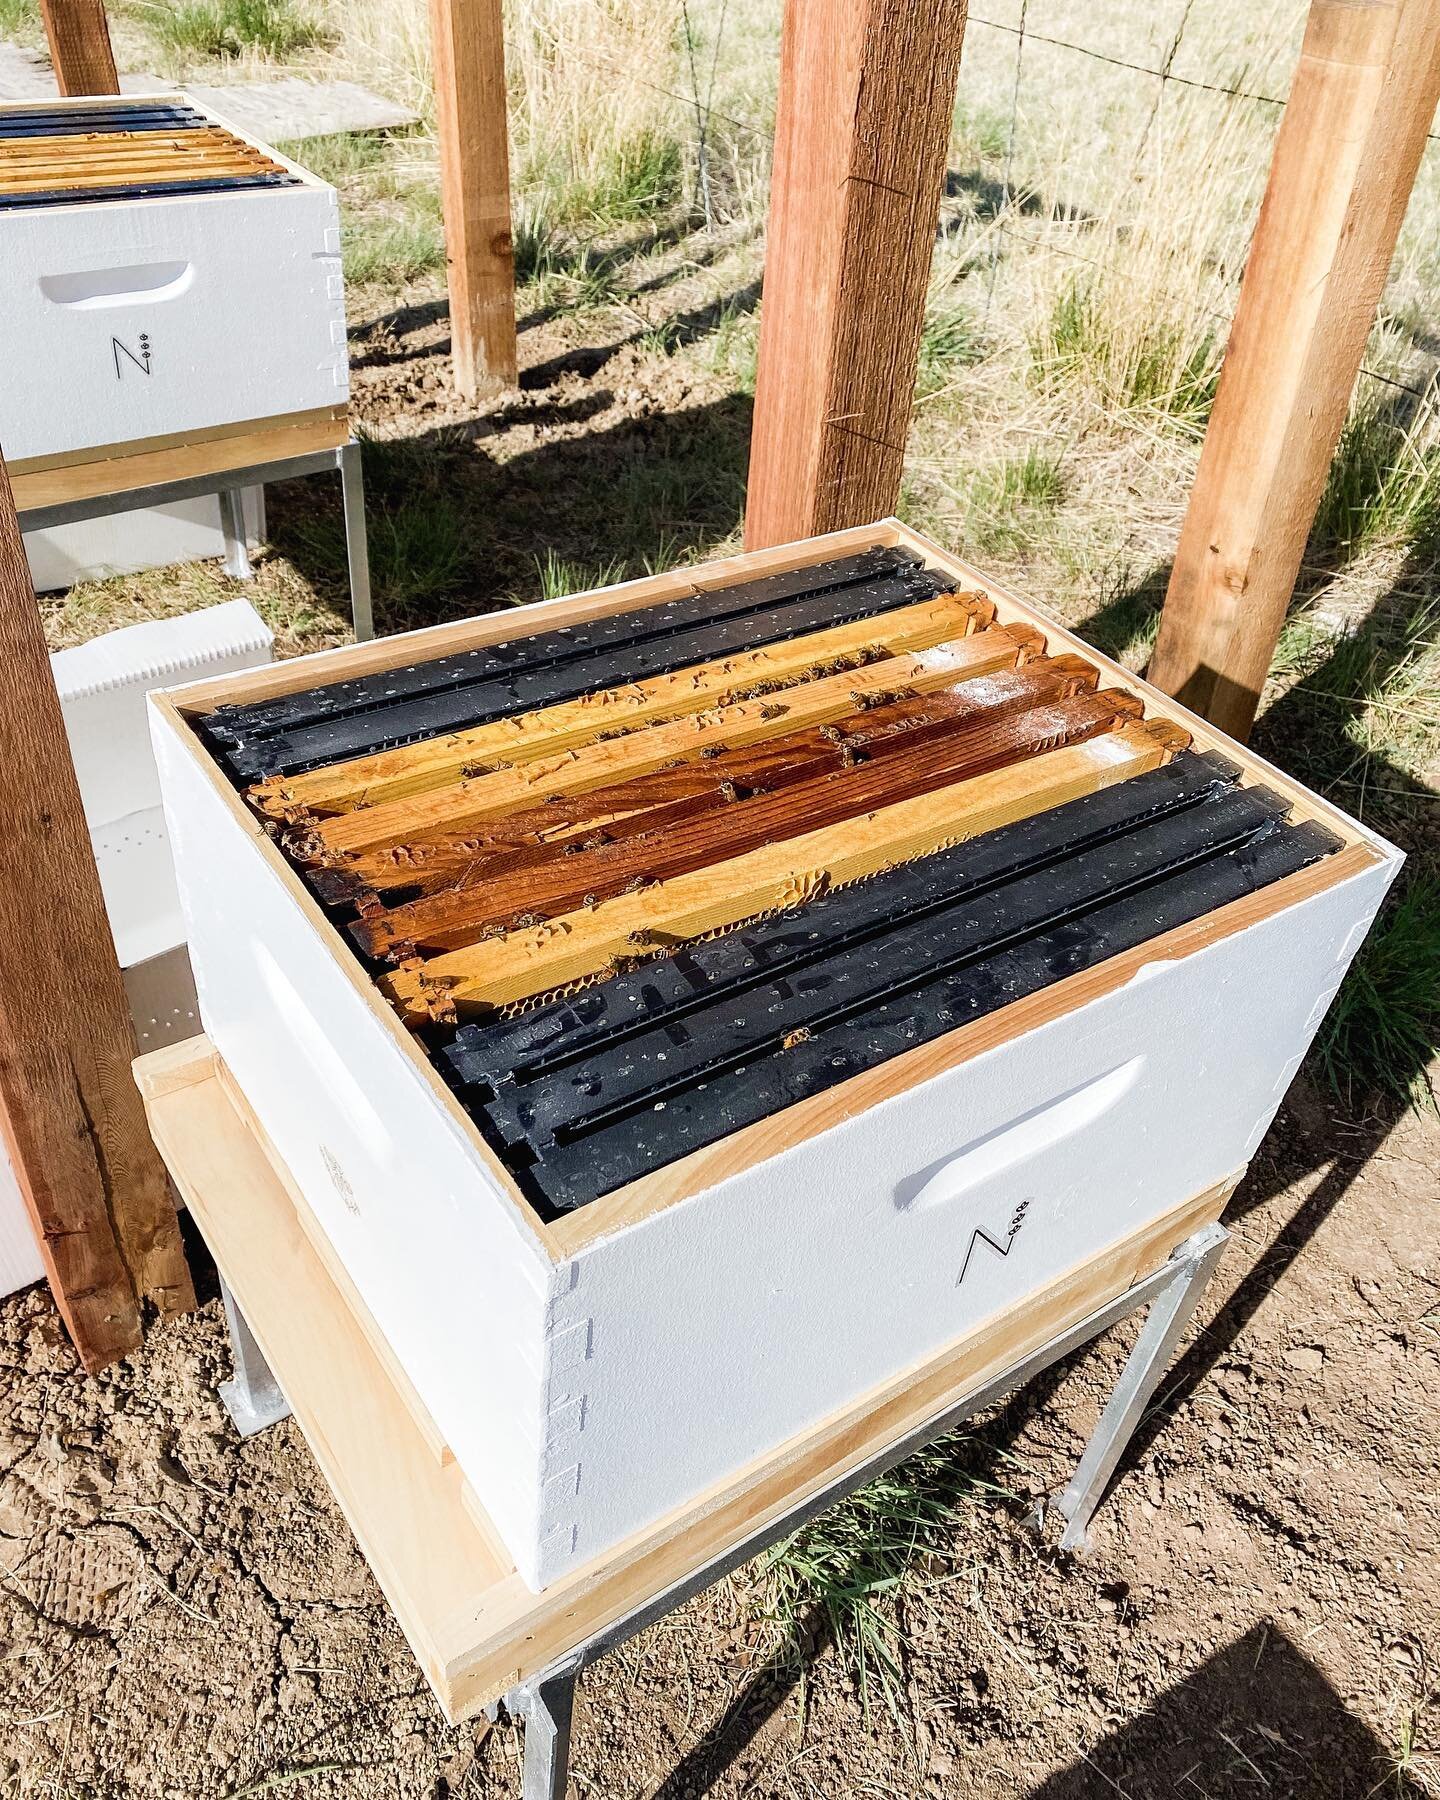 We still can&rsquo;t believe they&rsquo;re finally here! Get ready for some Grade A (or should I say &ldquo;Bee?!&rdquo;) content coming your way! 
&bull;
&bull;
&bull;
#beekeeping #beekeepers #bees #honeybees #lavenderfarm #discover #sidehustle #phy